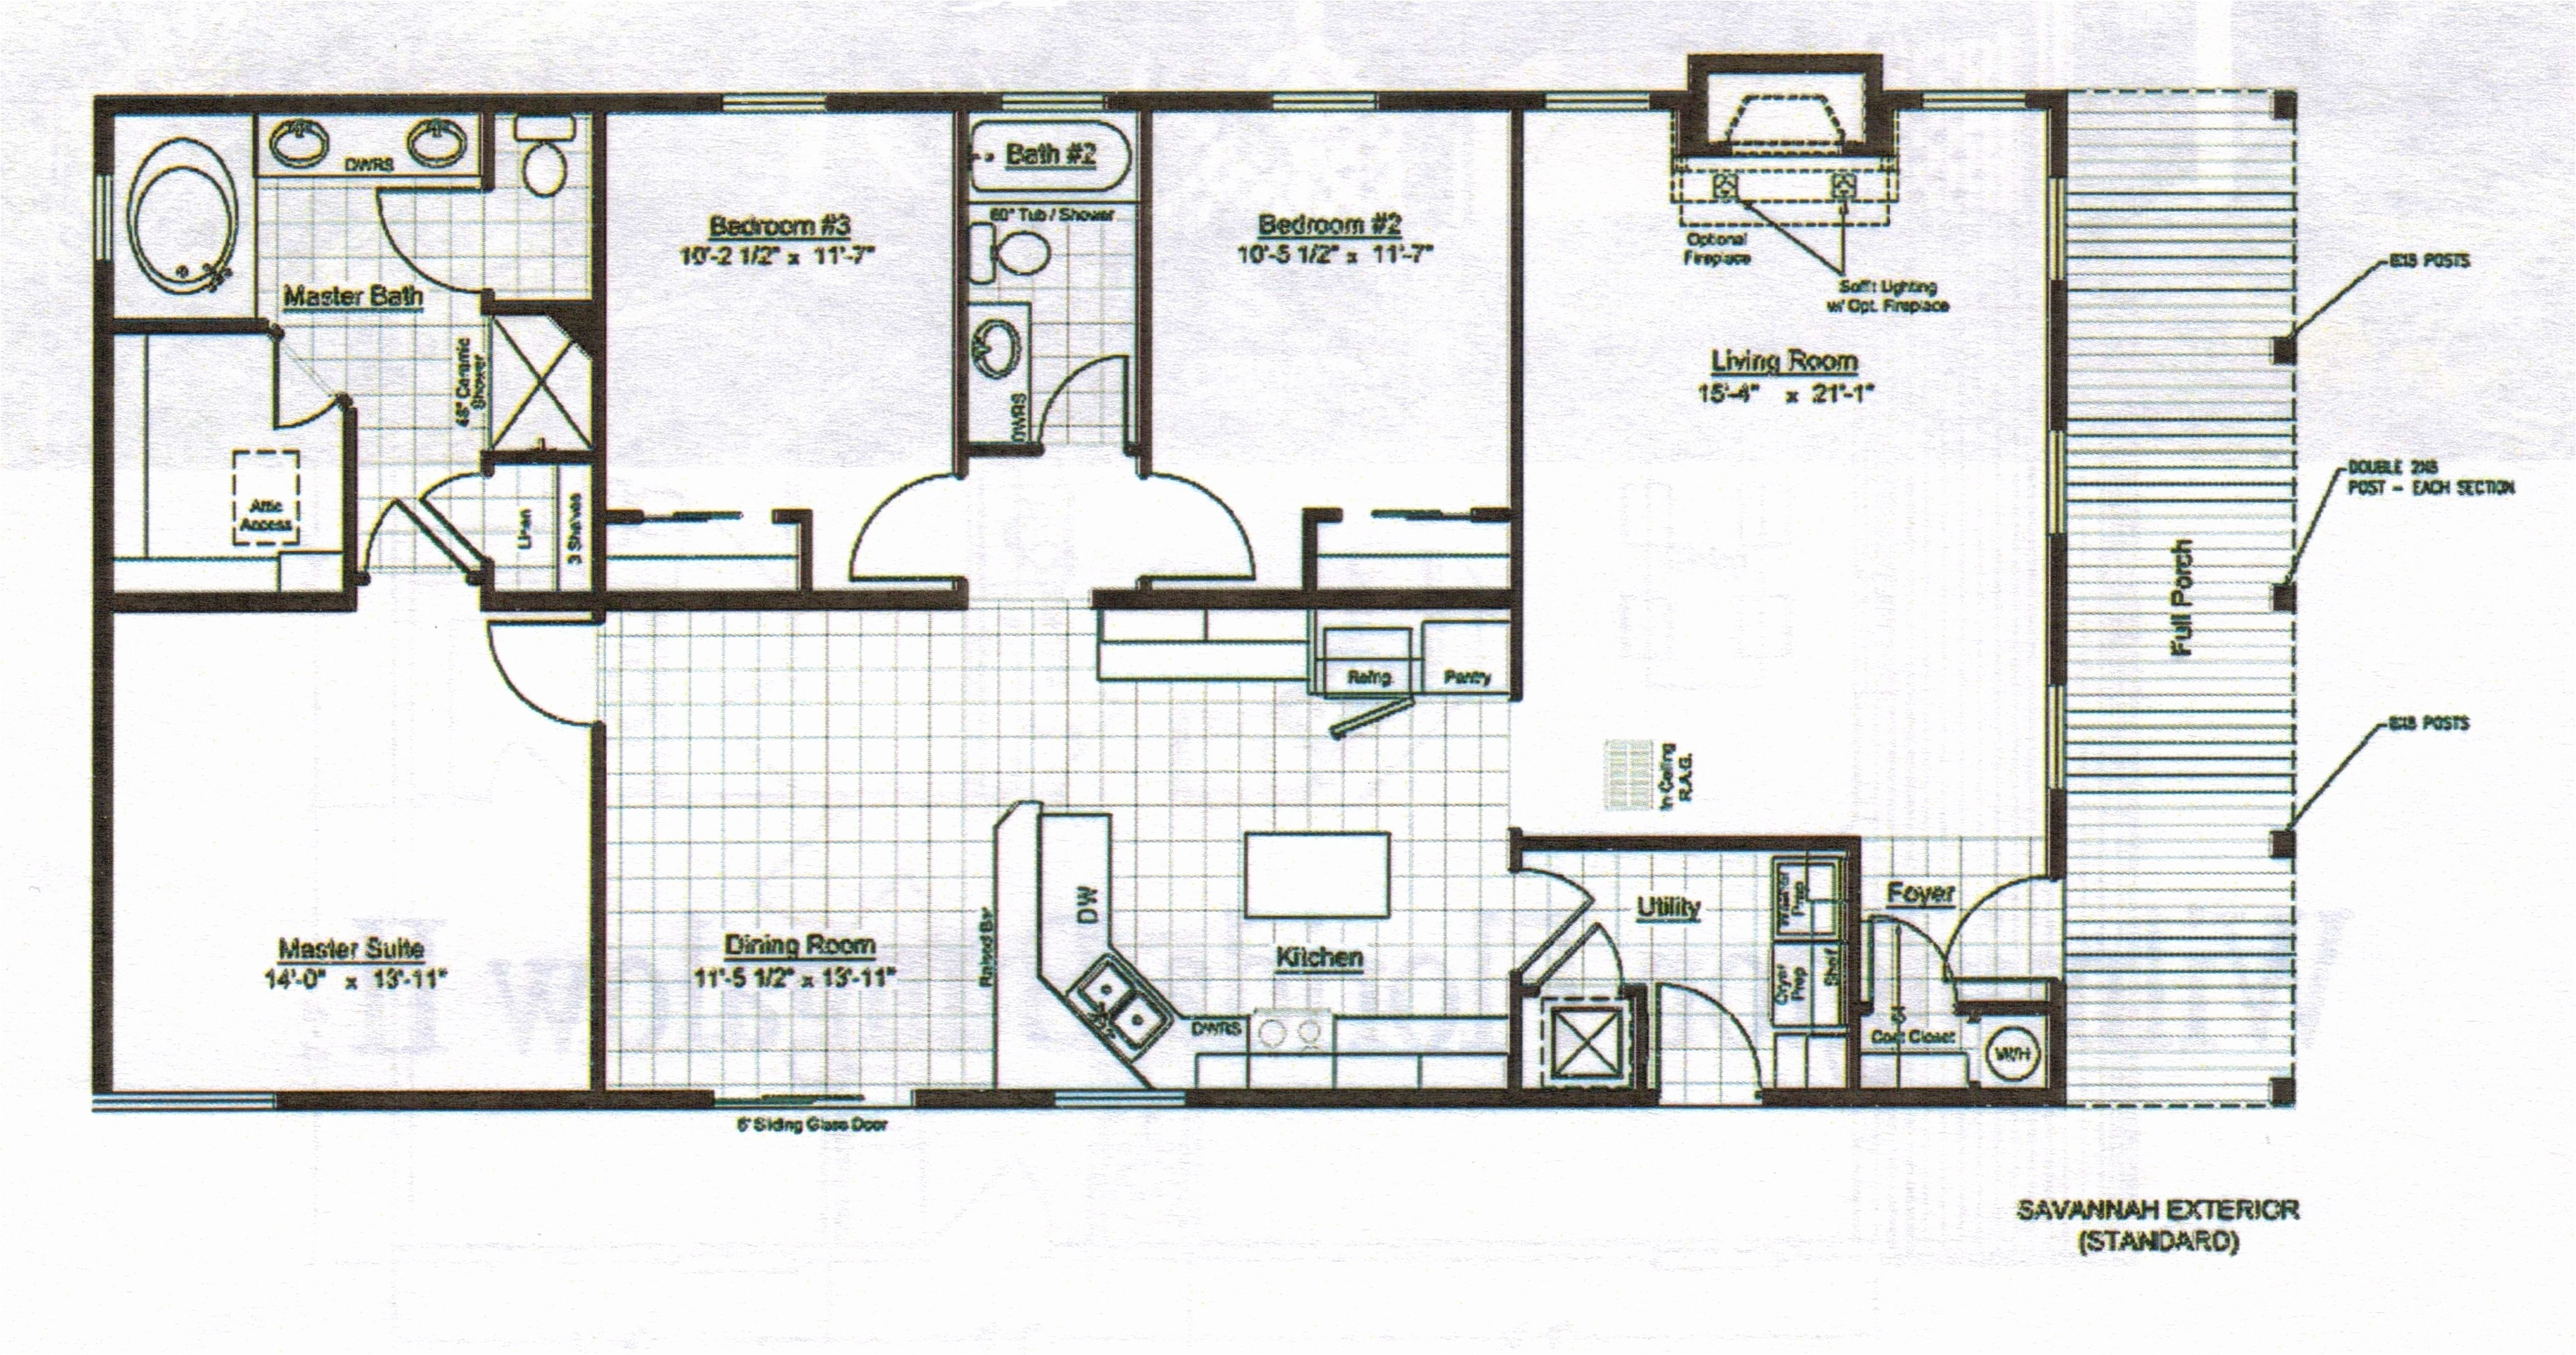 free house plans awesome bathroom floor plan layouts free best image house design layout gallery of